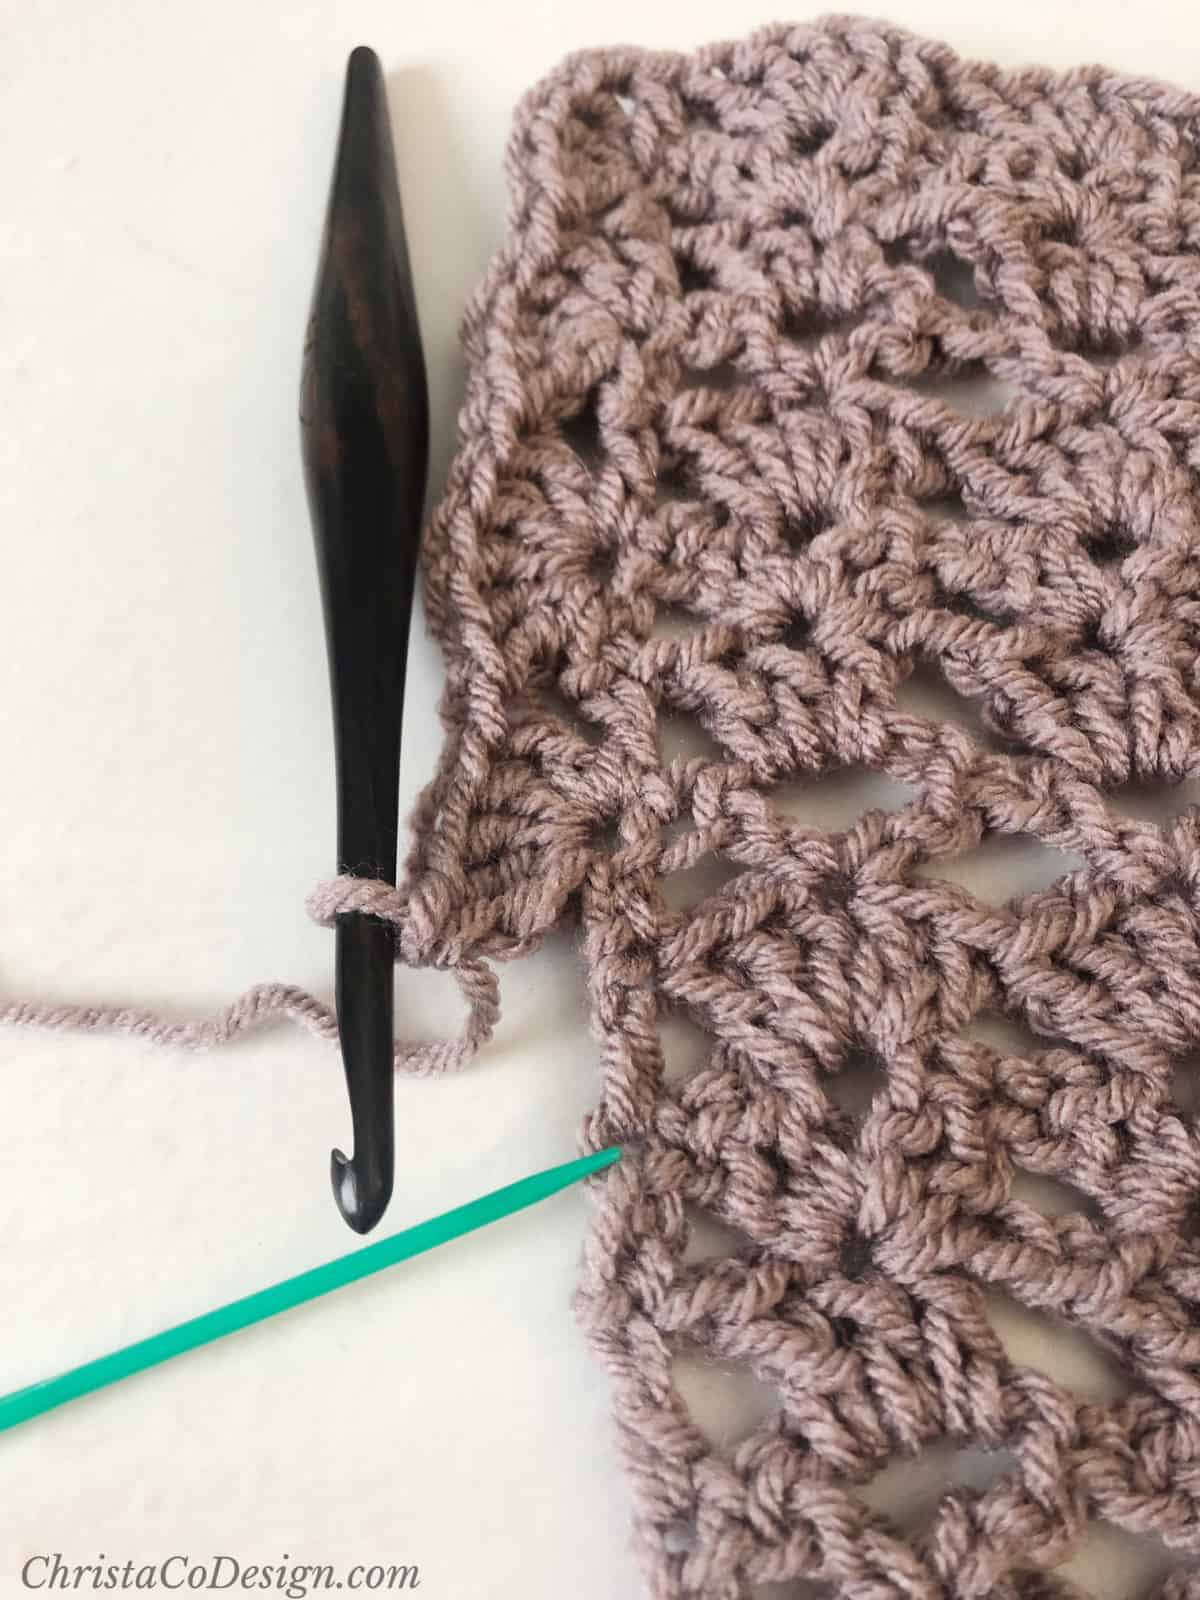 Green needle pointing where to start next shell stitch on shawl border.